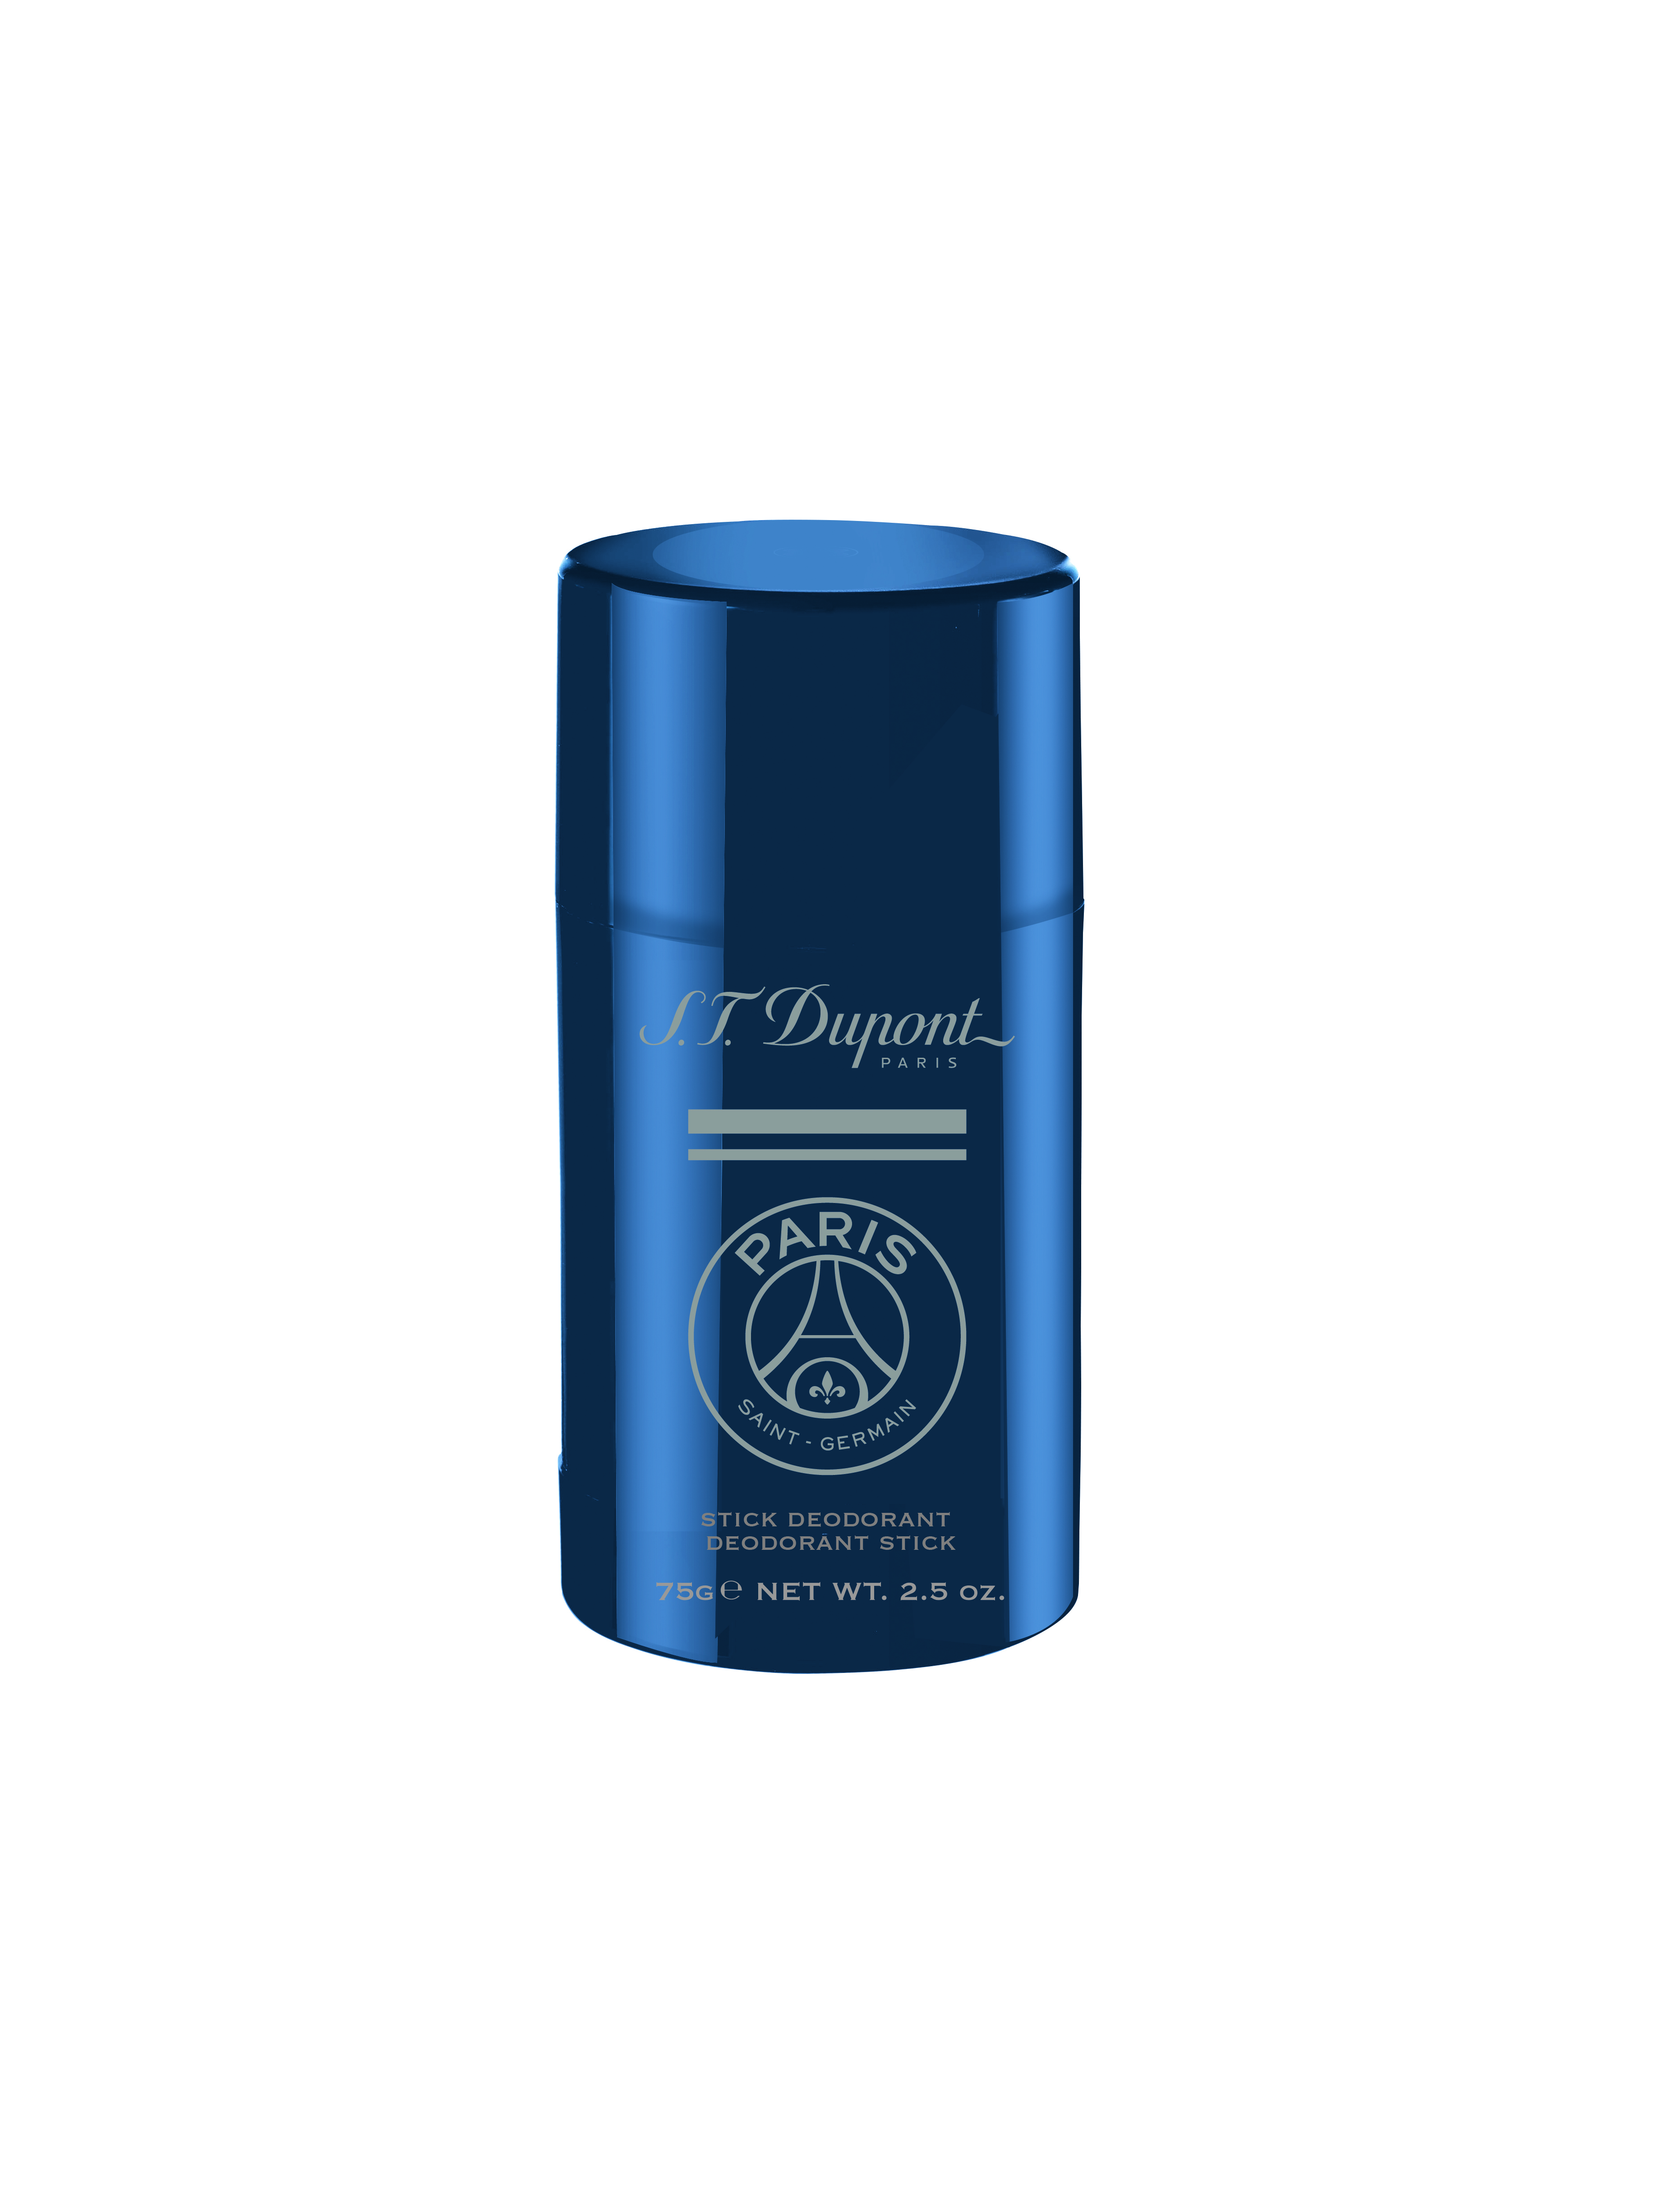 St Dupont Deo 75g